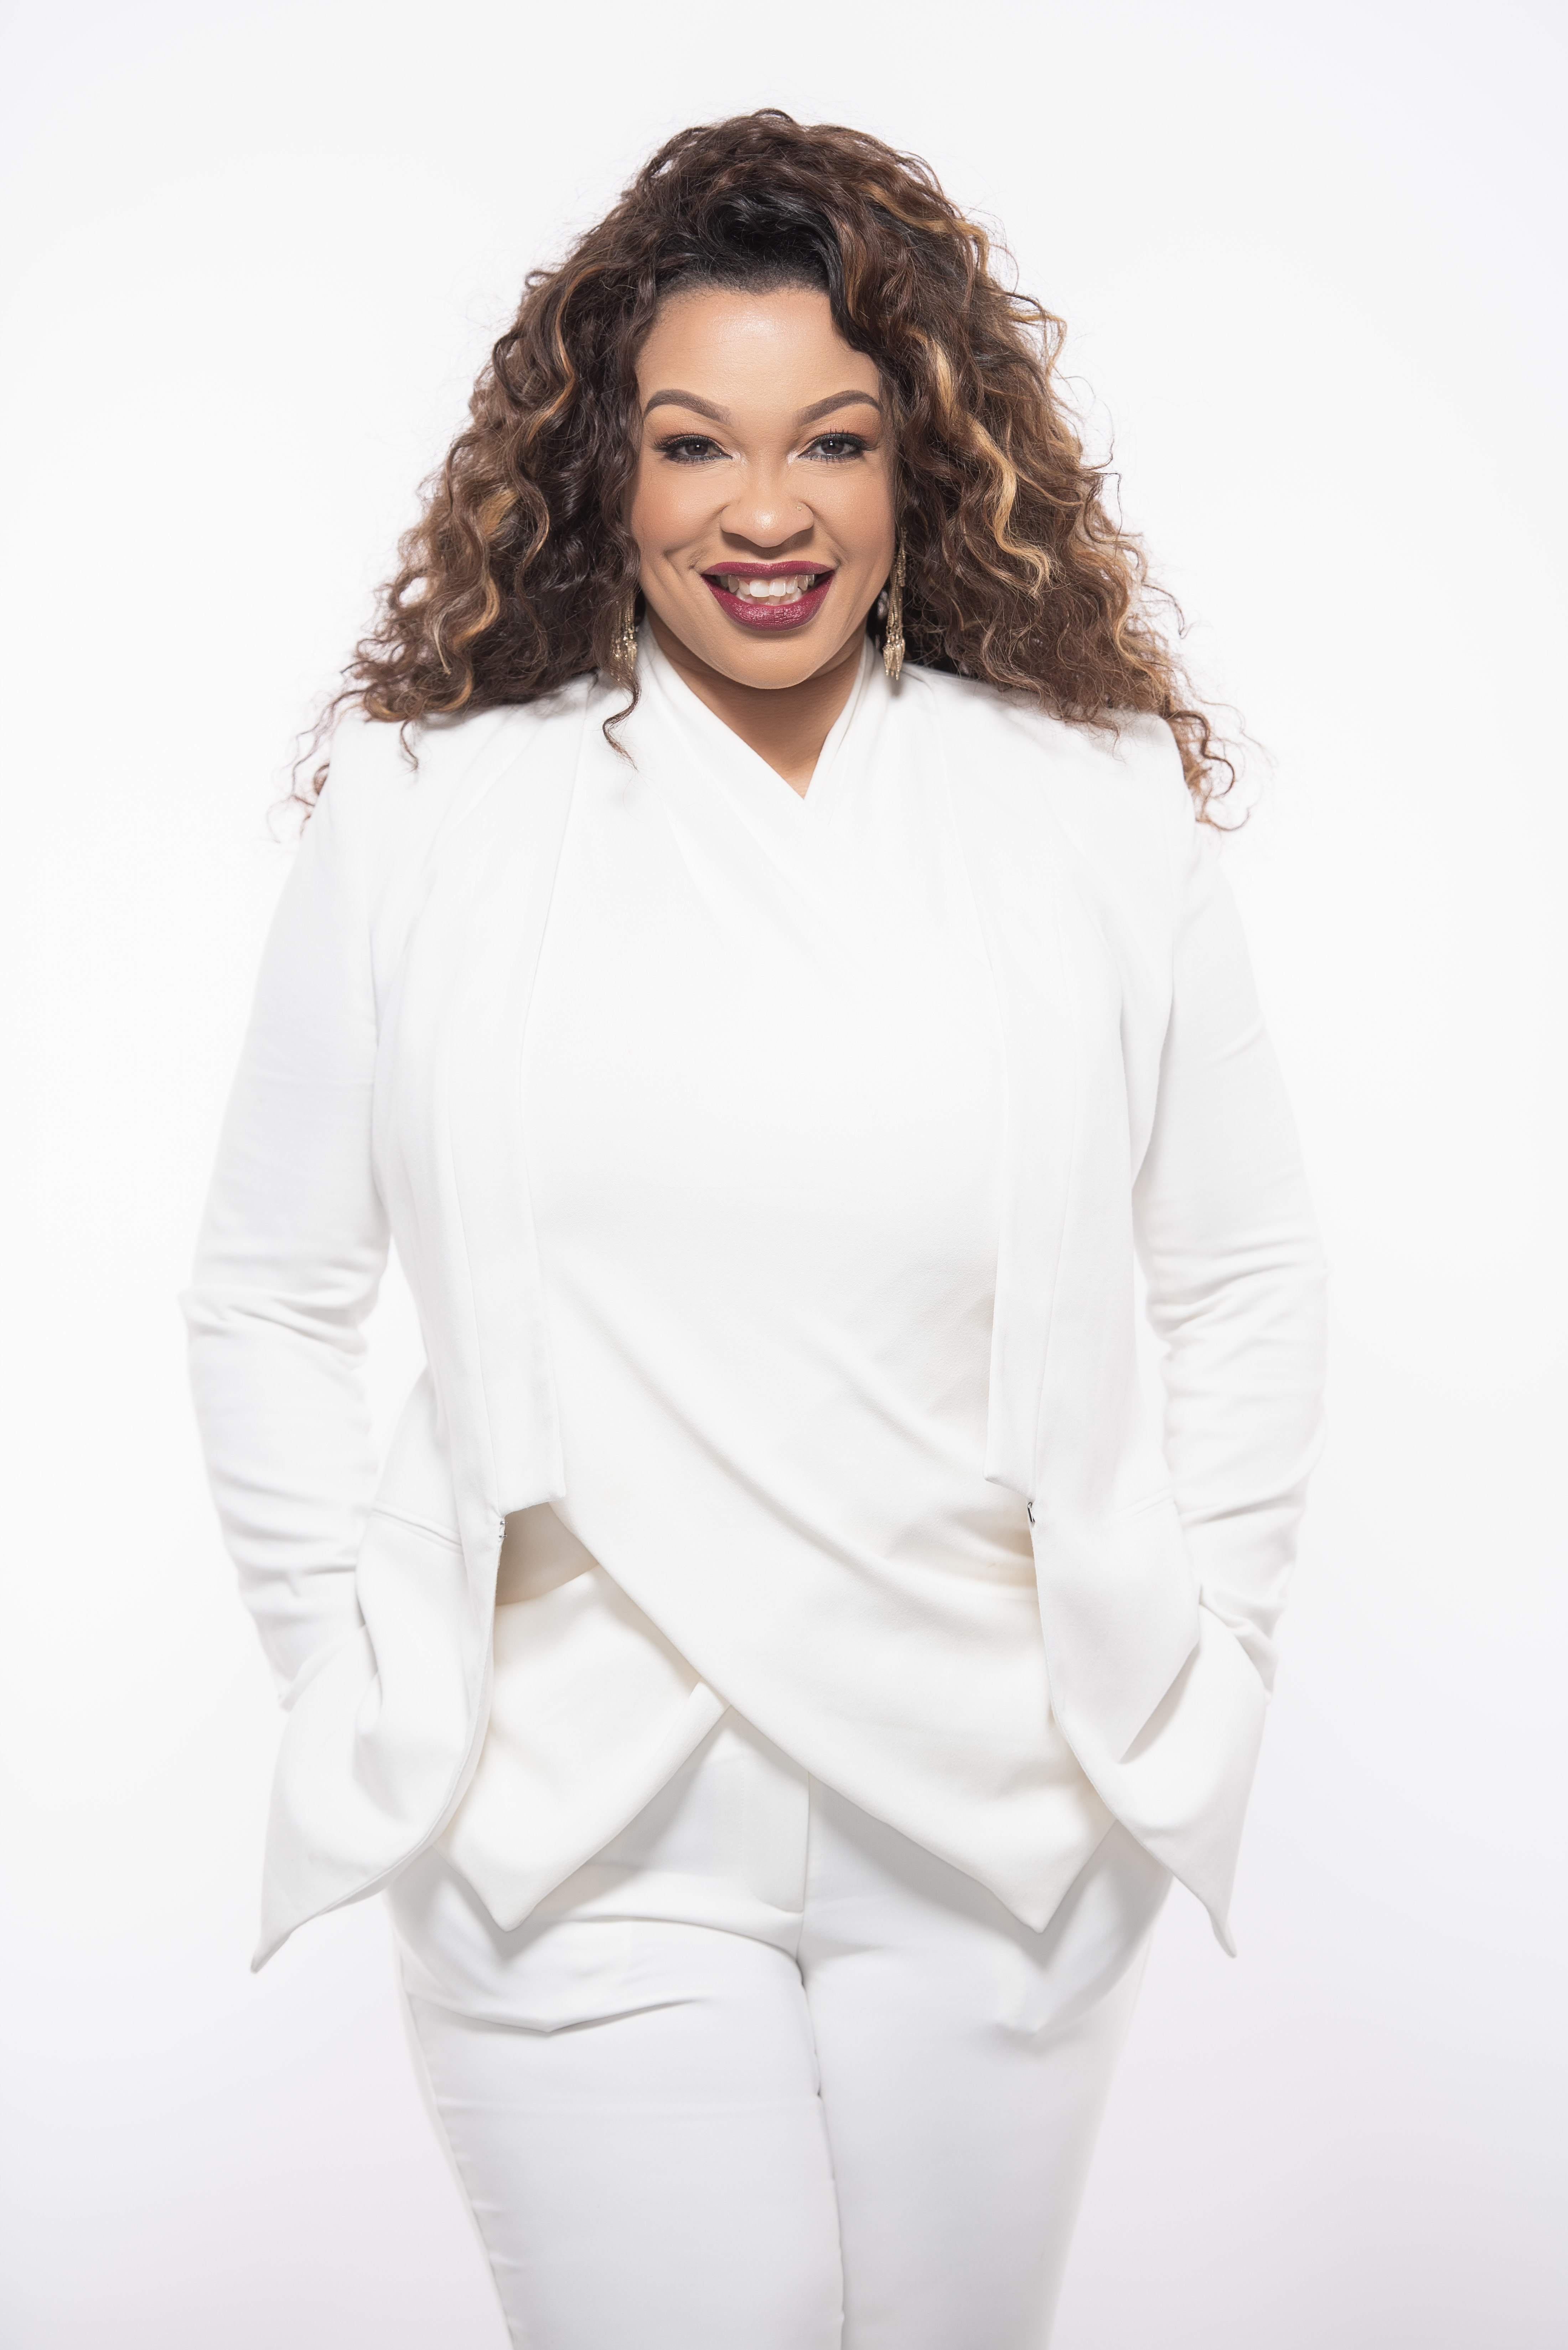 L. Michelle Smith explains why ‘charting your own path’ is key to success